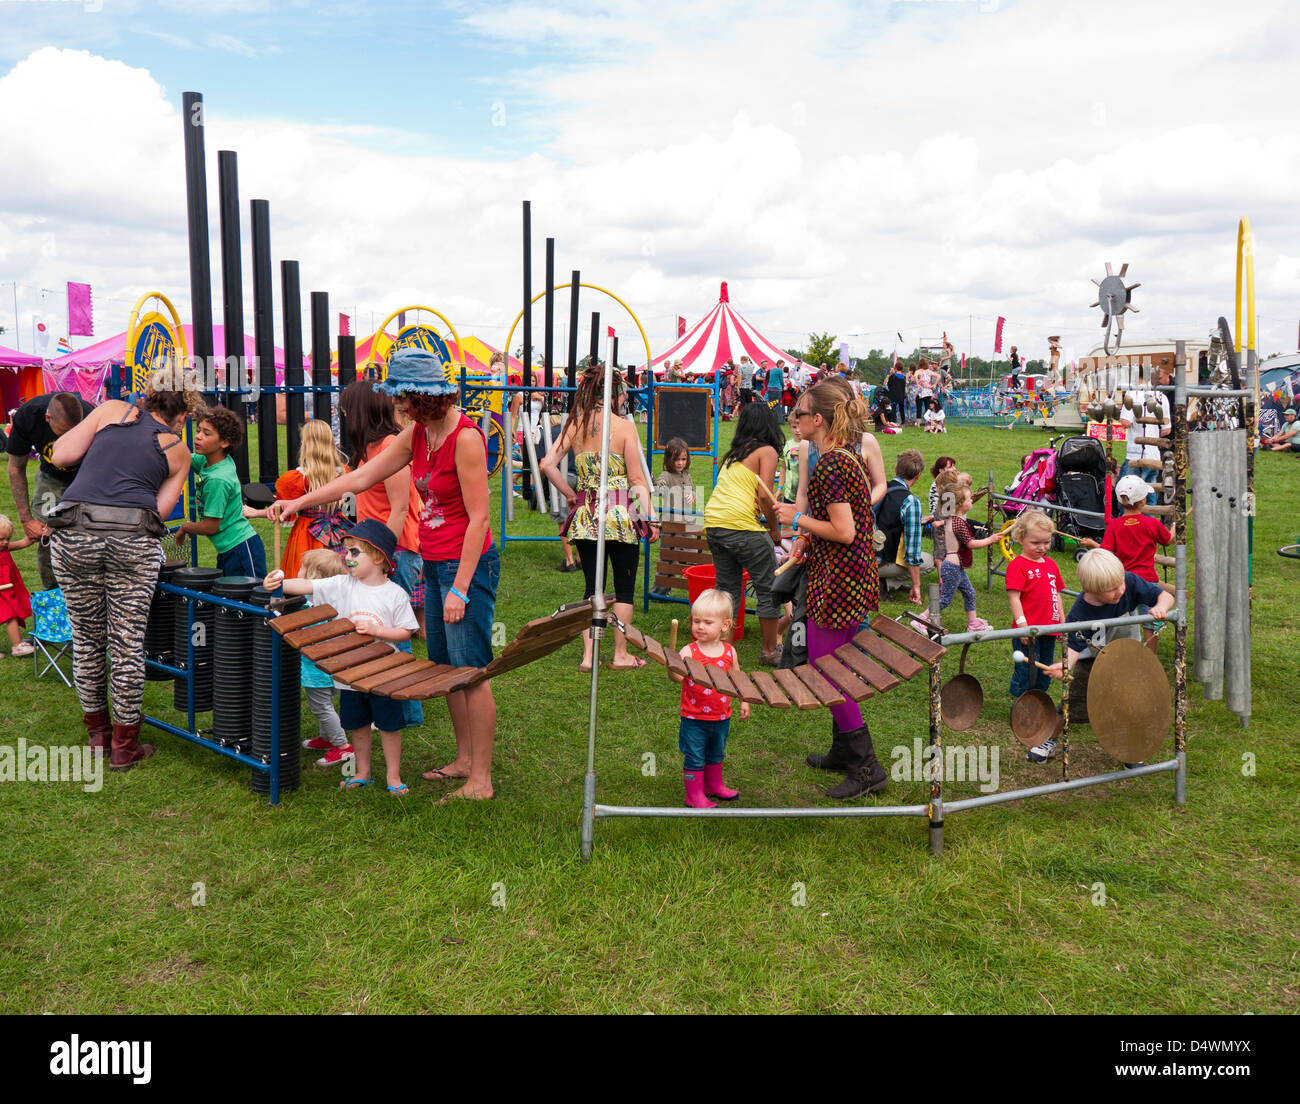 Children playing musical instruments in the kids field at Shambala festival Stock Photo